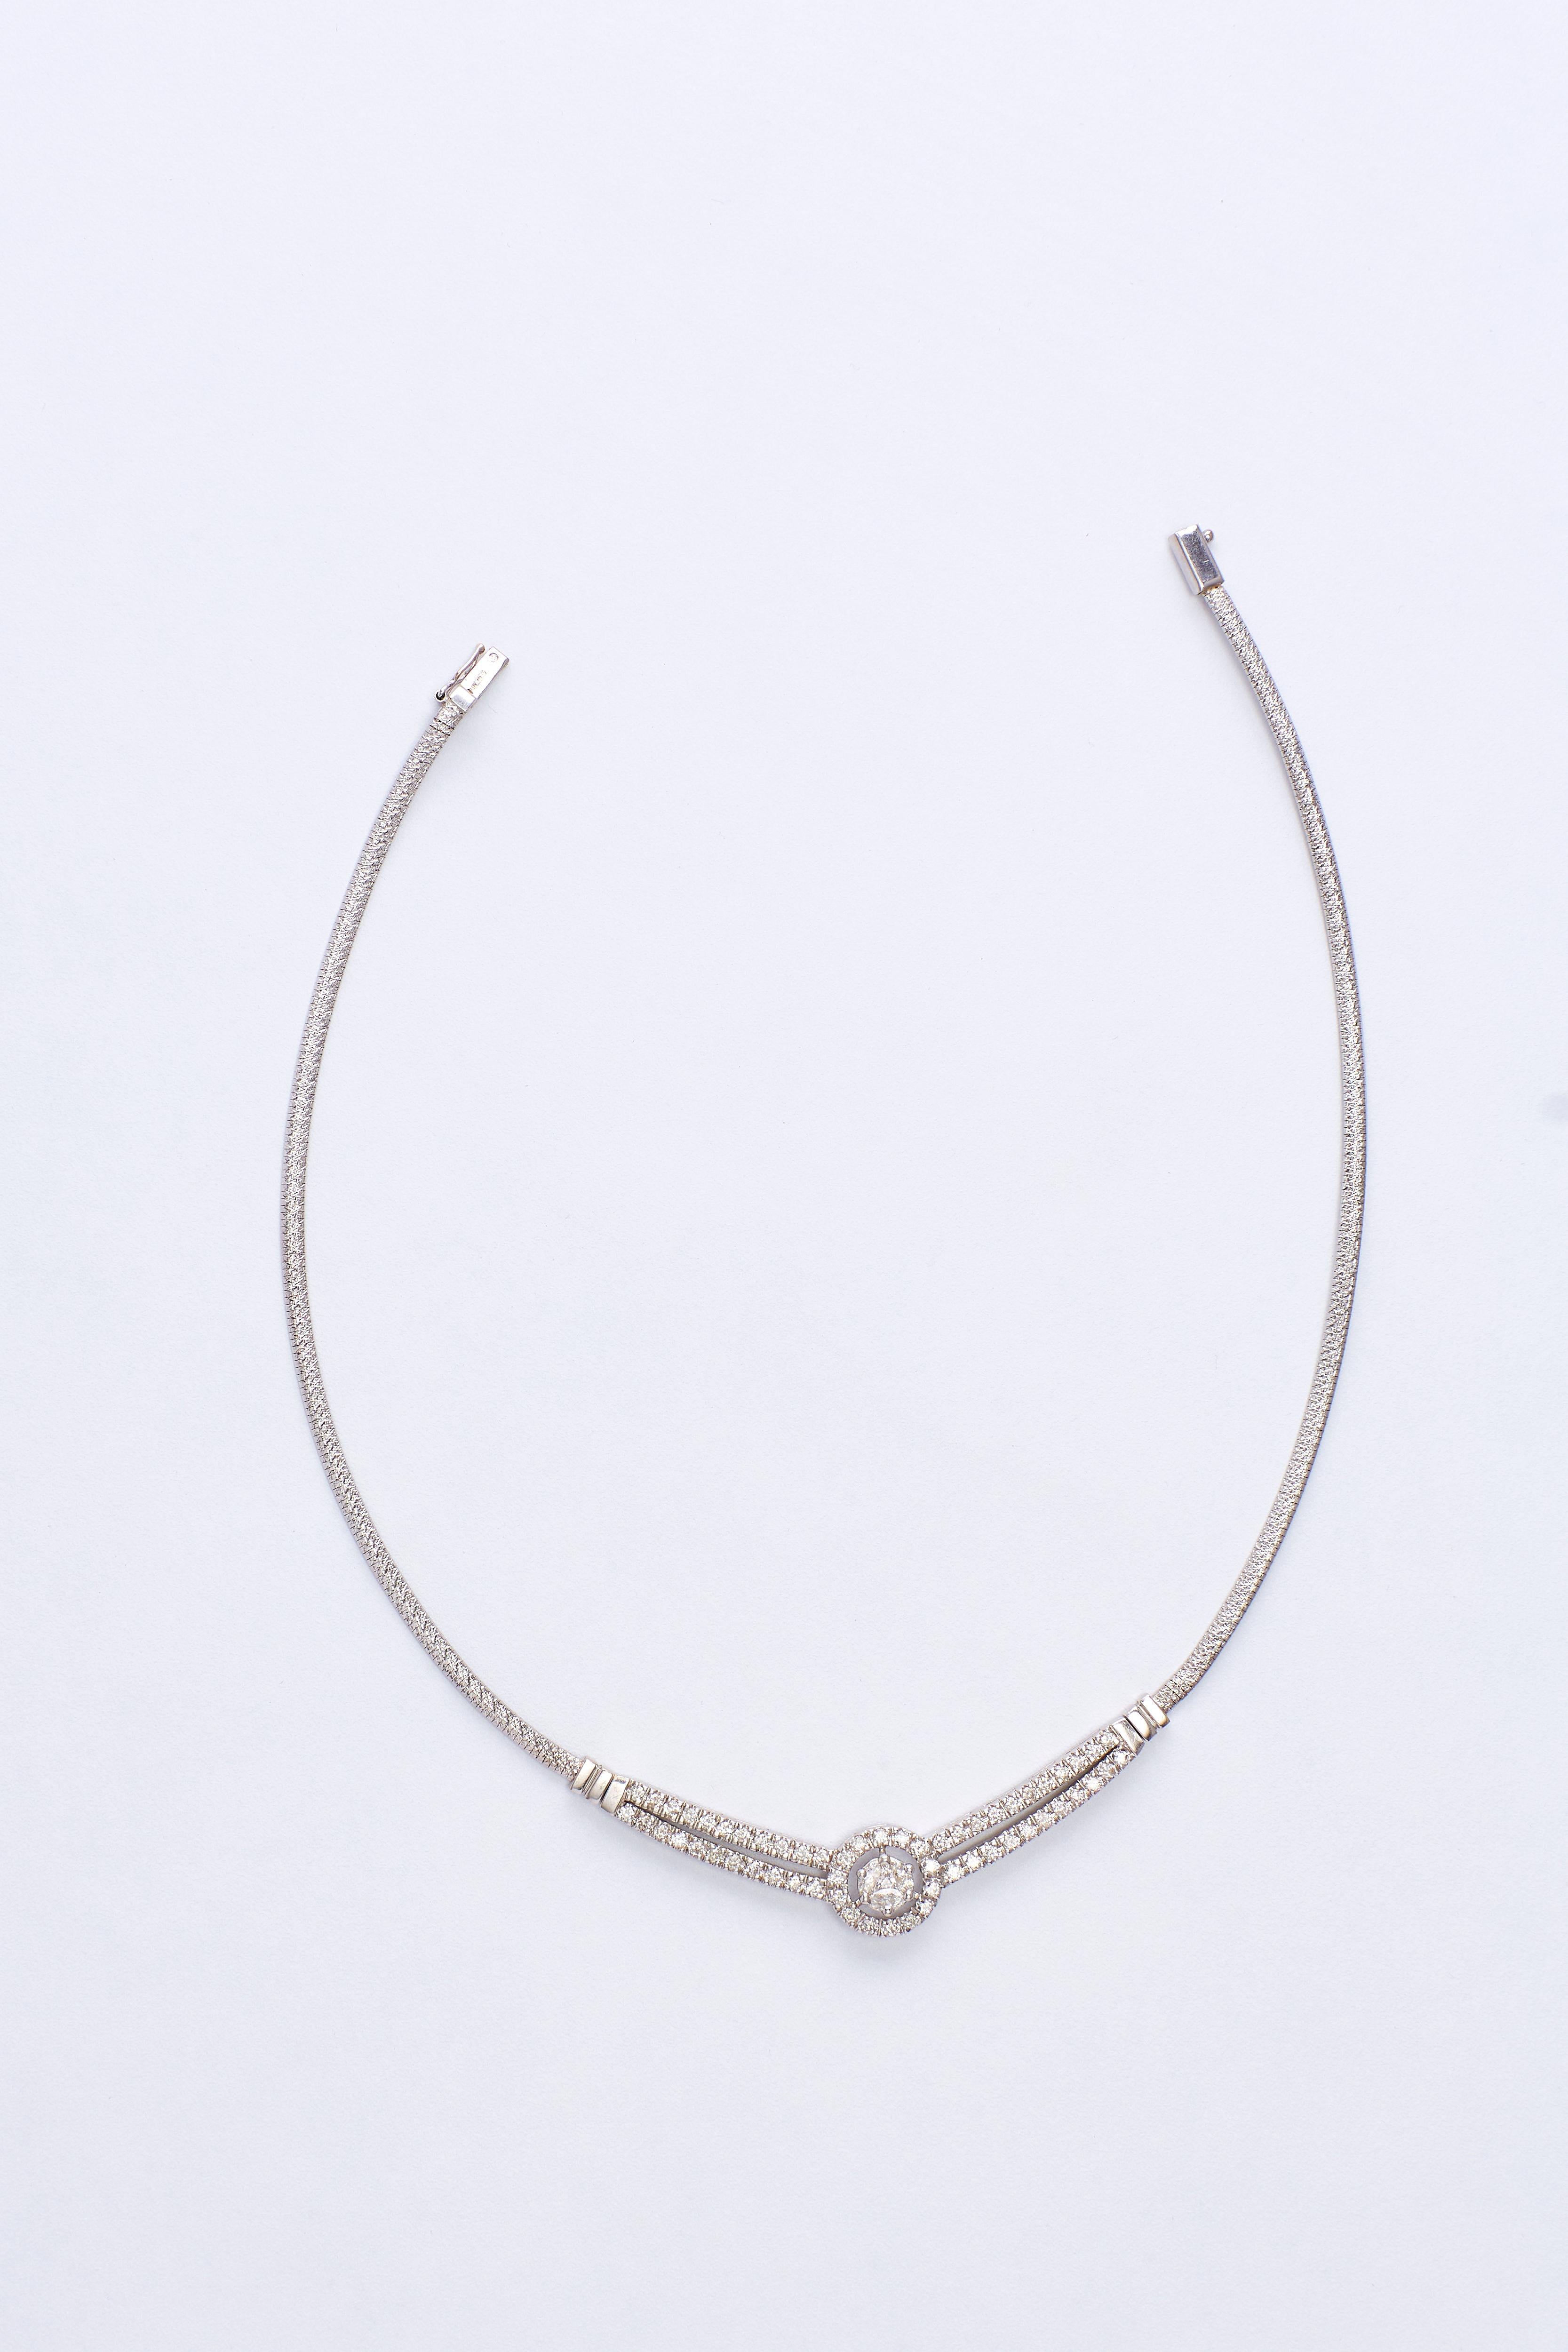 Marquise Cut White Gold Diamonds Necklace